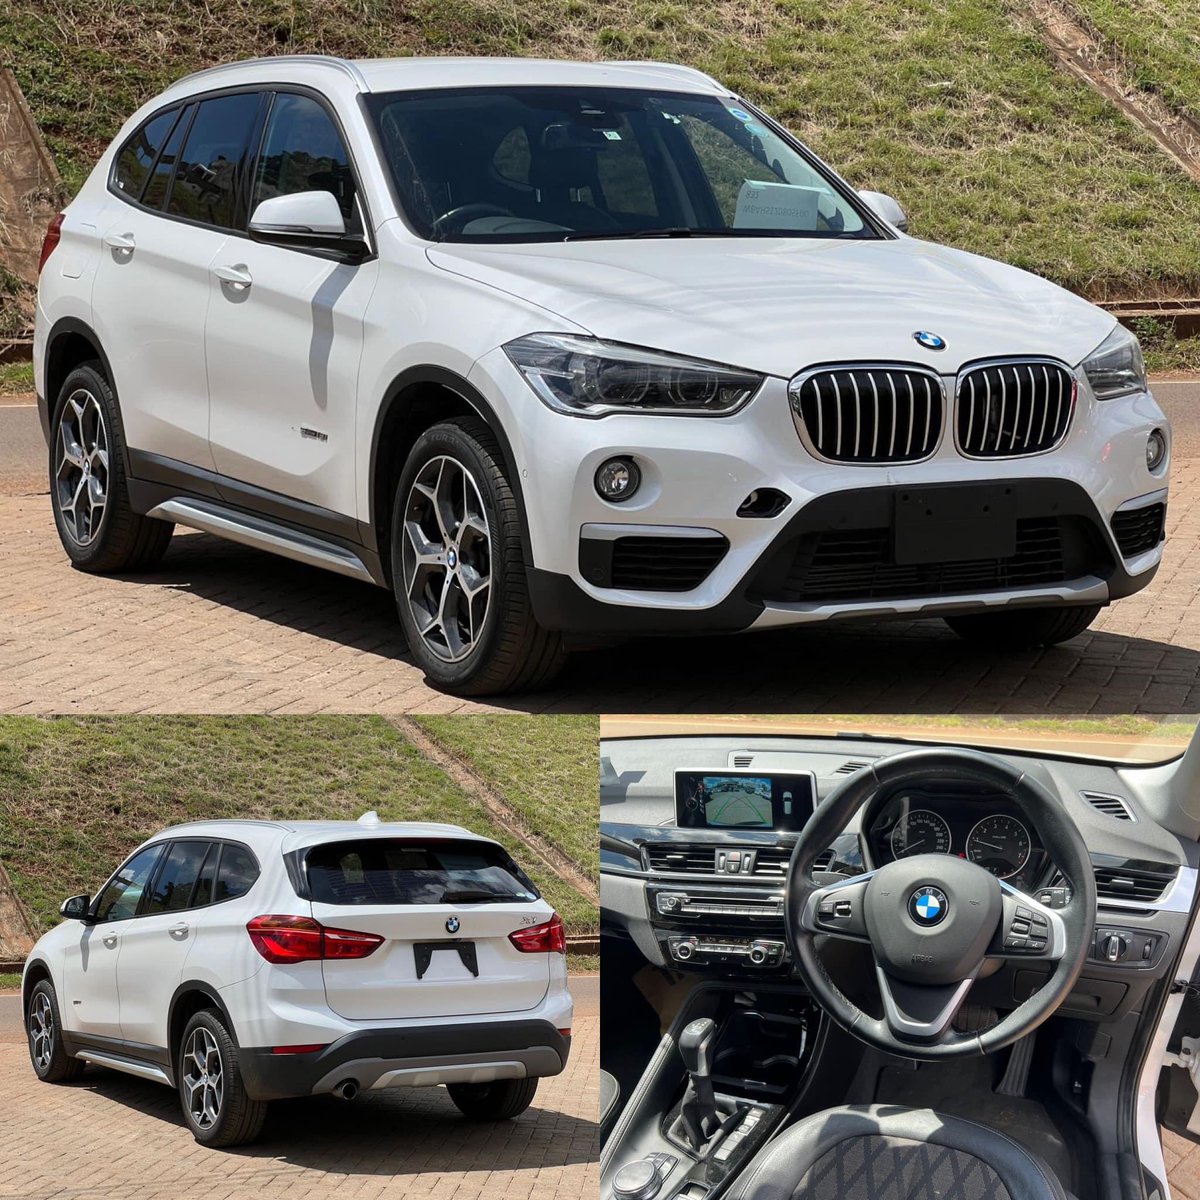 Once upon a budget of Kes 3M was enough to get you a 2013/2014 Q5 fresh from Japan. Times have changed however and Q5s now retail north of Kes 4M new, Worry not however! “‘New shape” Bmw X1 has a huge cabin , sufficiently powerful lesson and can be bought for less than Kes 3.5M✅